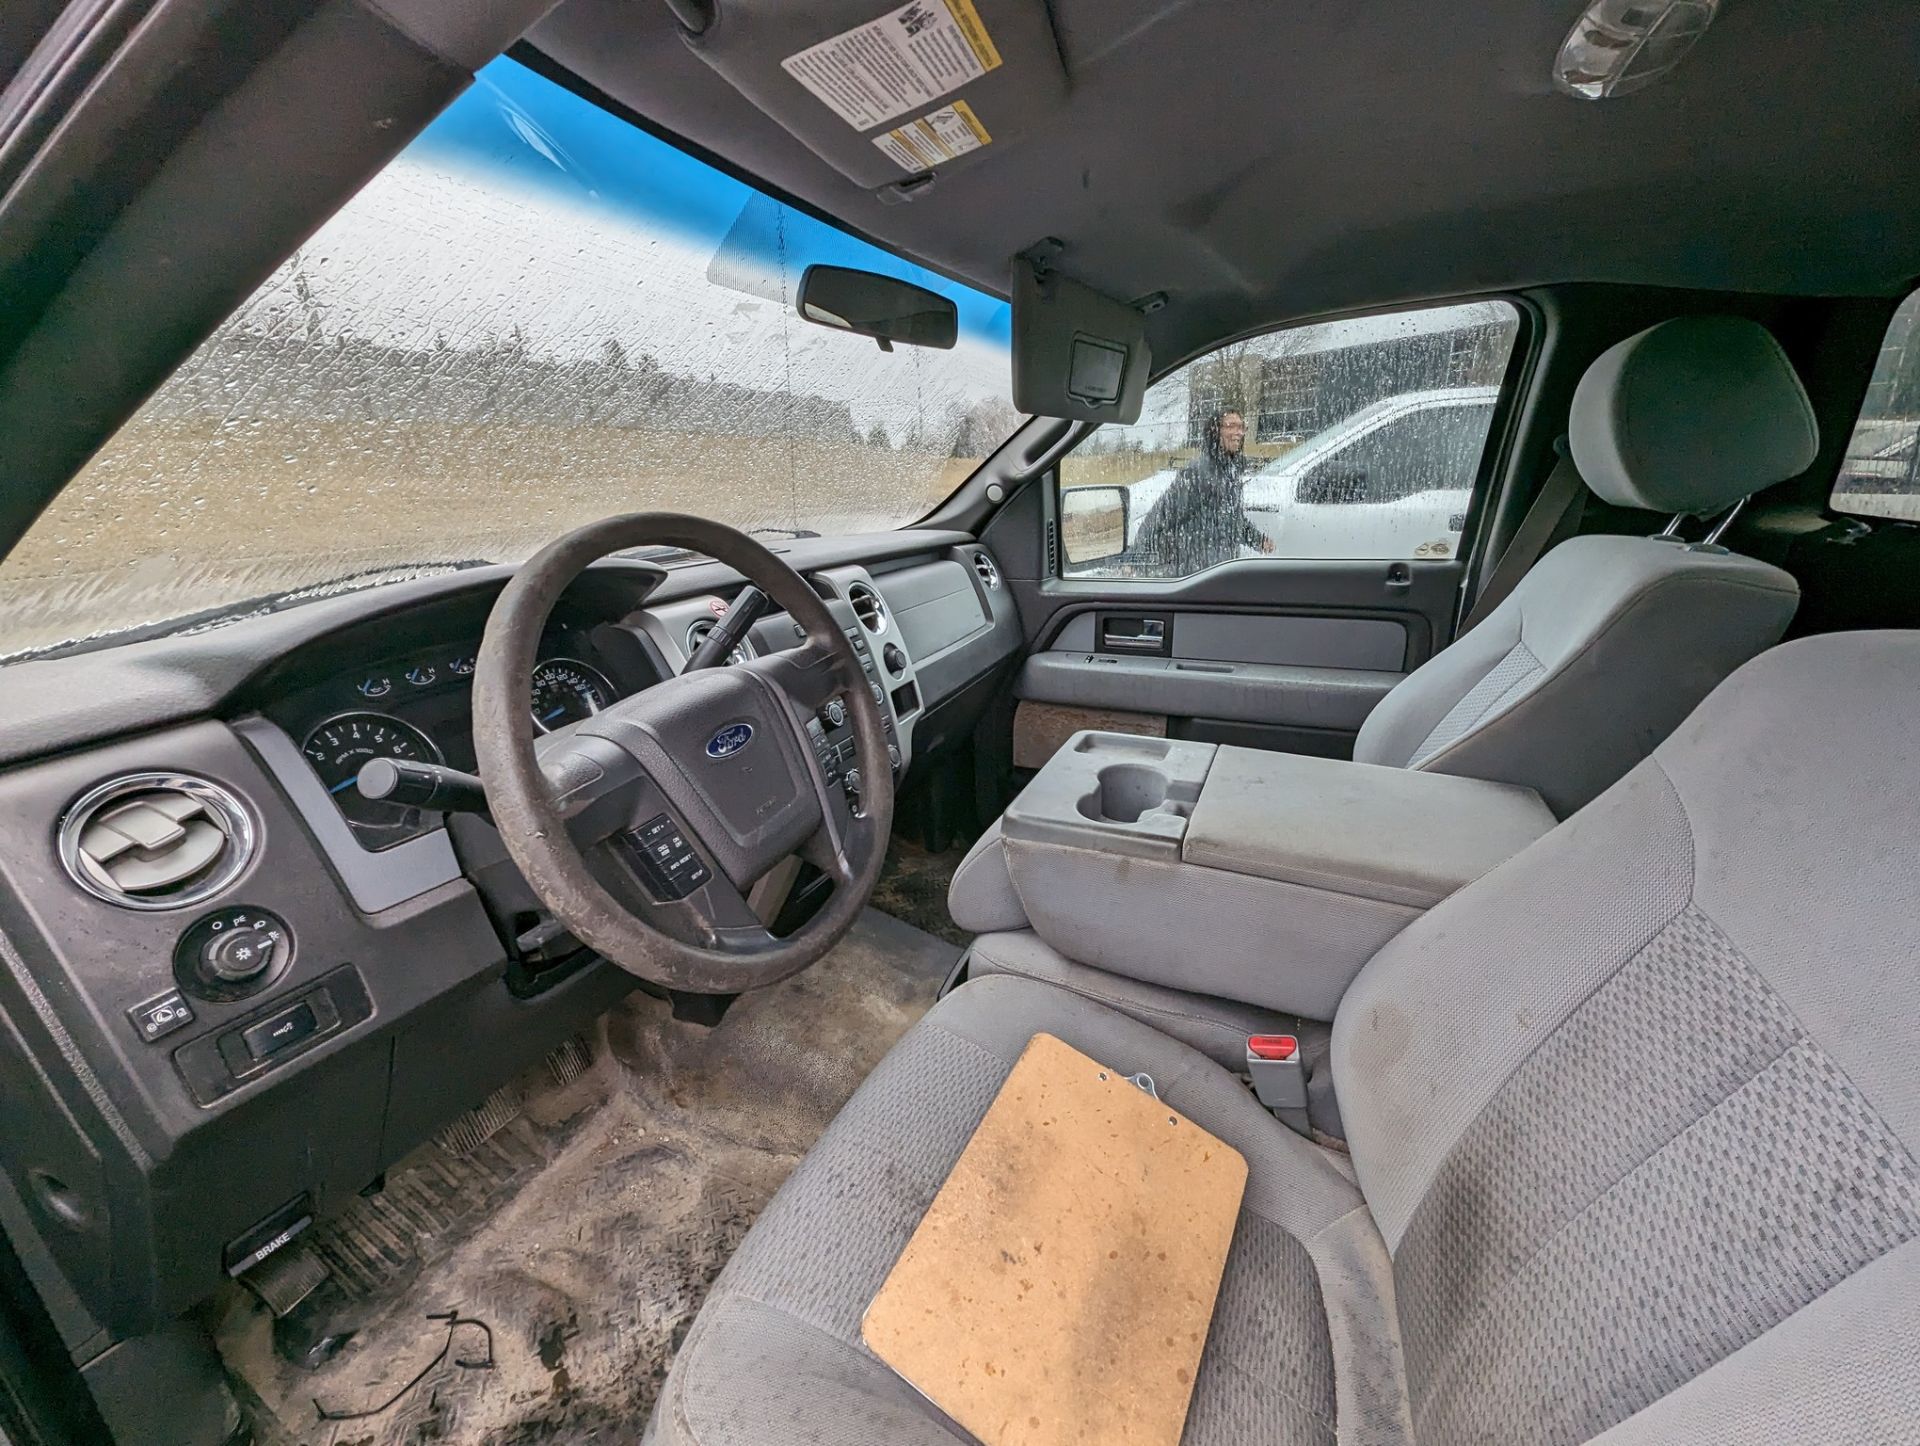 2013 FORD F150 XLT PICKUP TRUCK, VIN# 1FTNF1CFXDKF50570, APPROX. 423,552KMS (NO BLACK TOOL BOXES) - Image 7 of 9